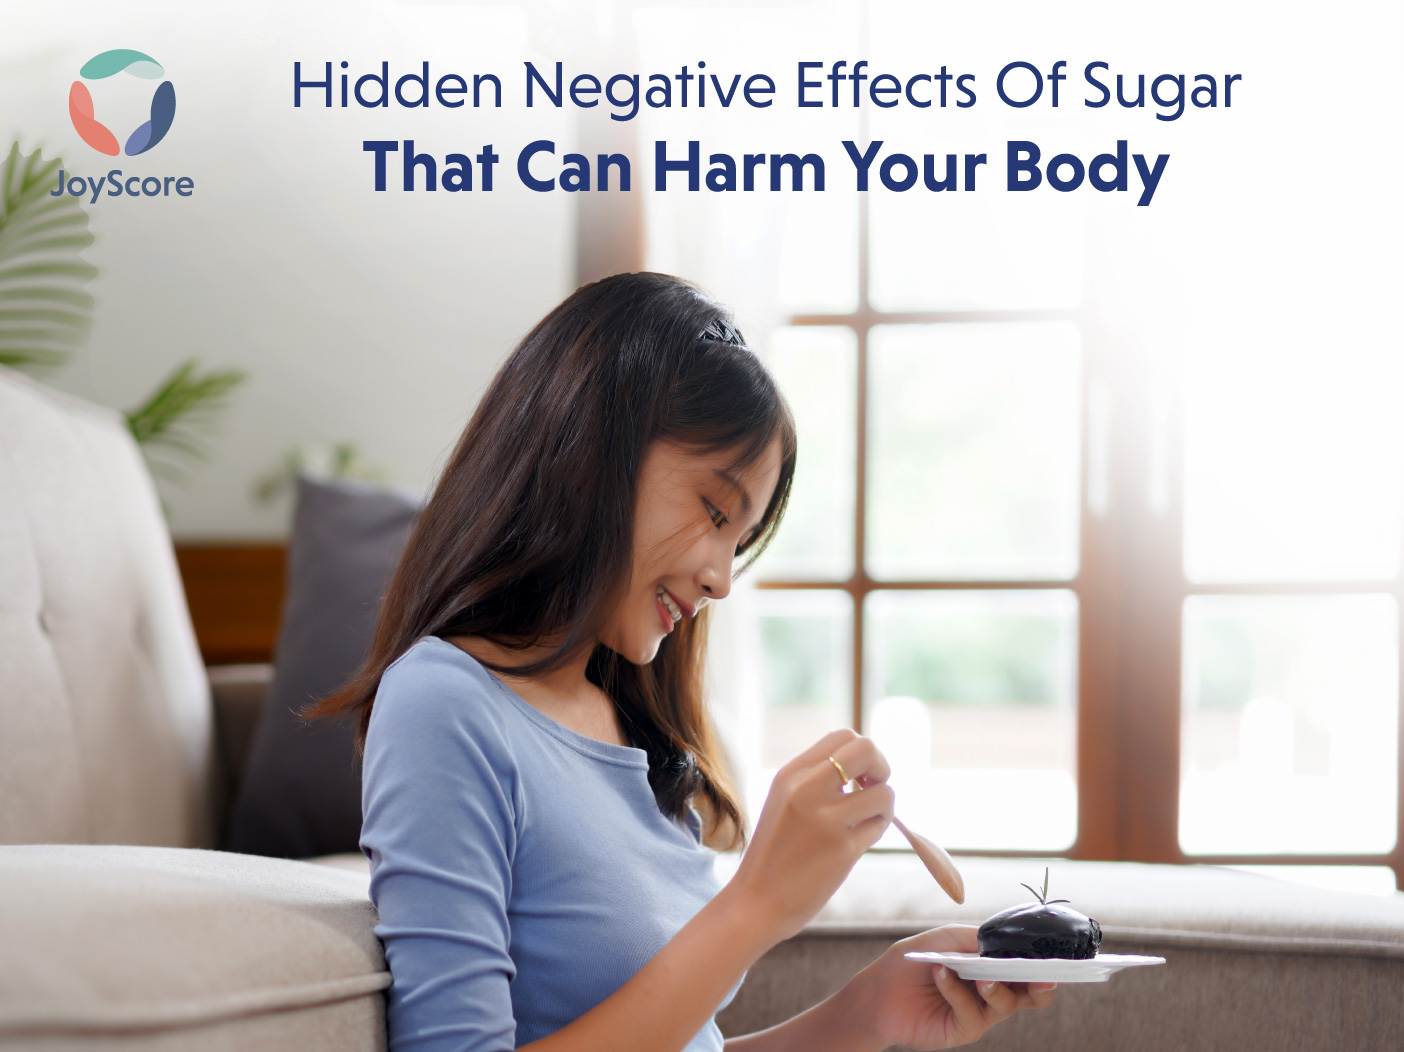 10 Hidden Negative Effects Of Sugar That Can Harm Your Body